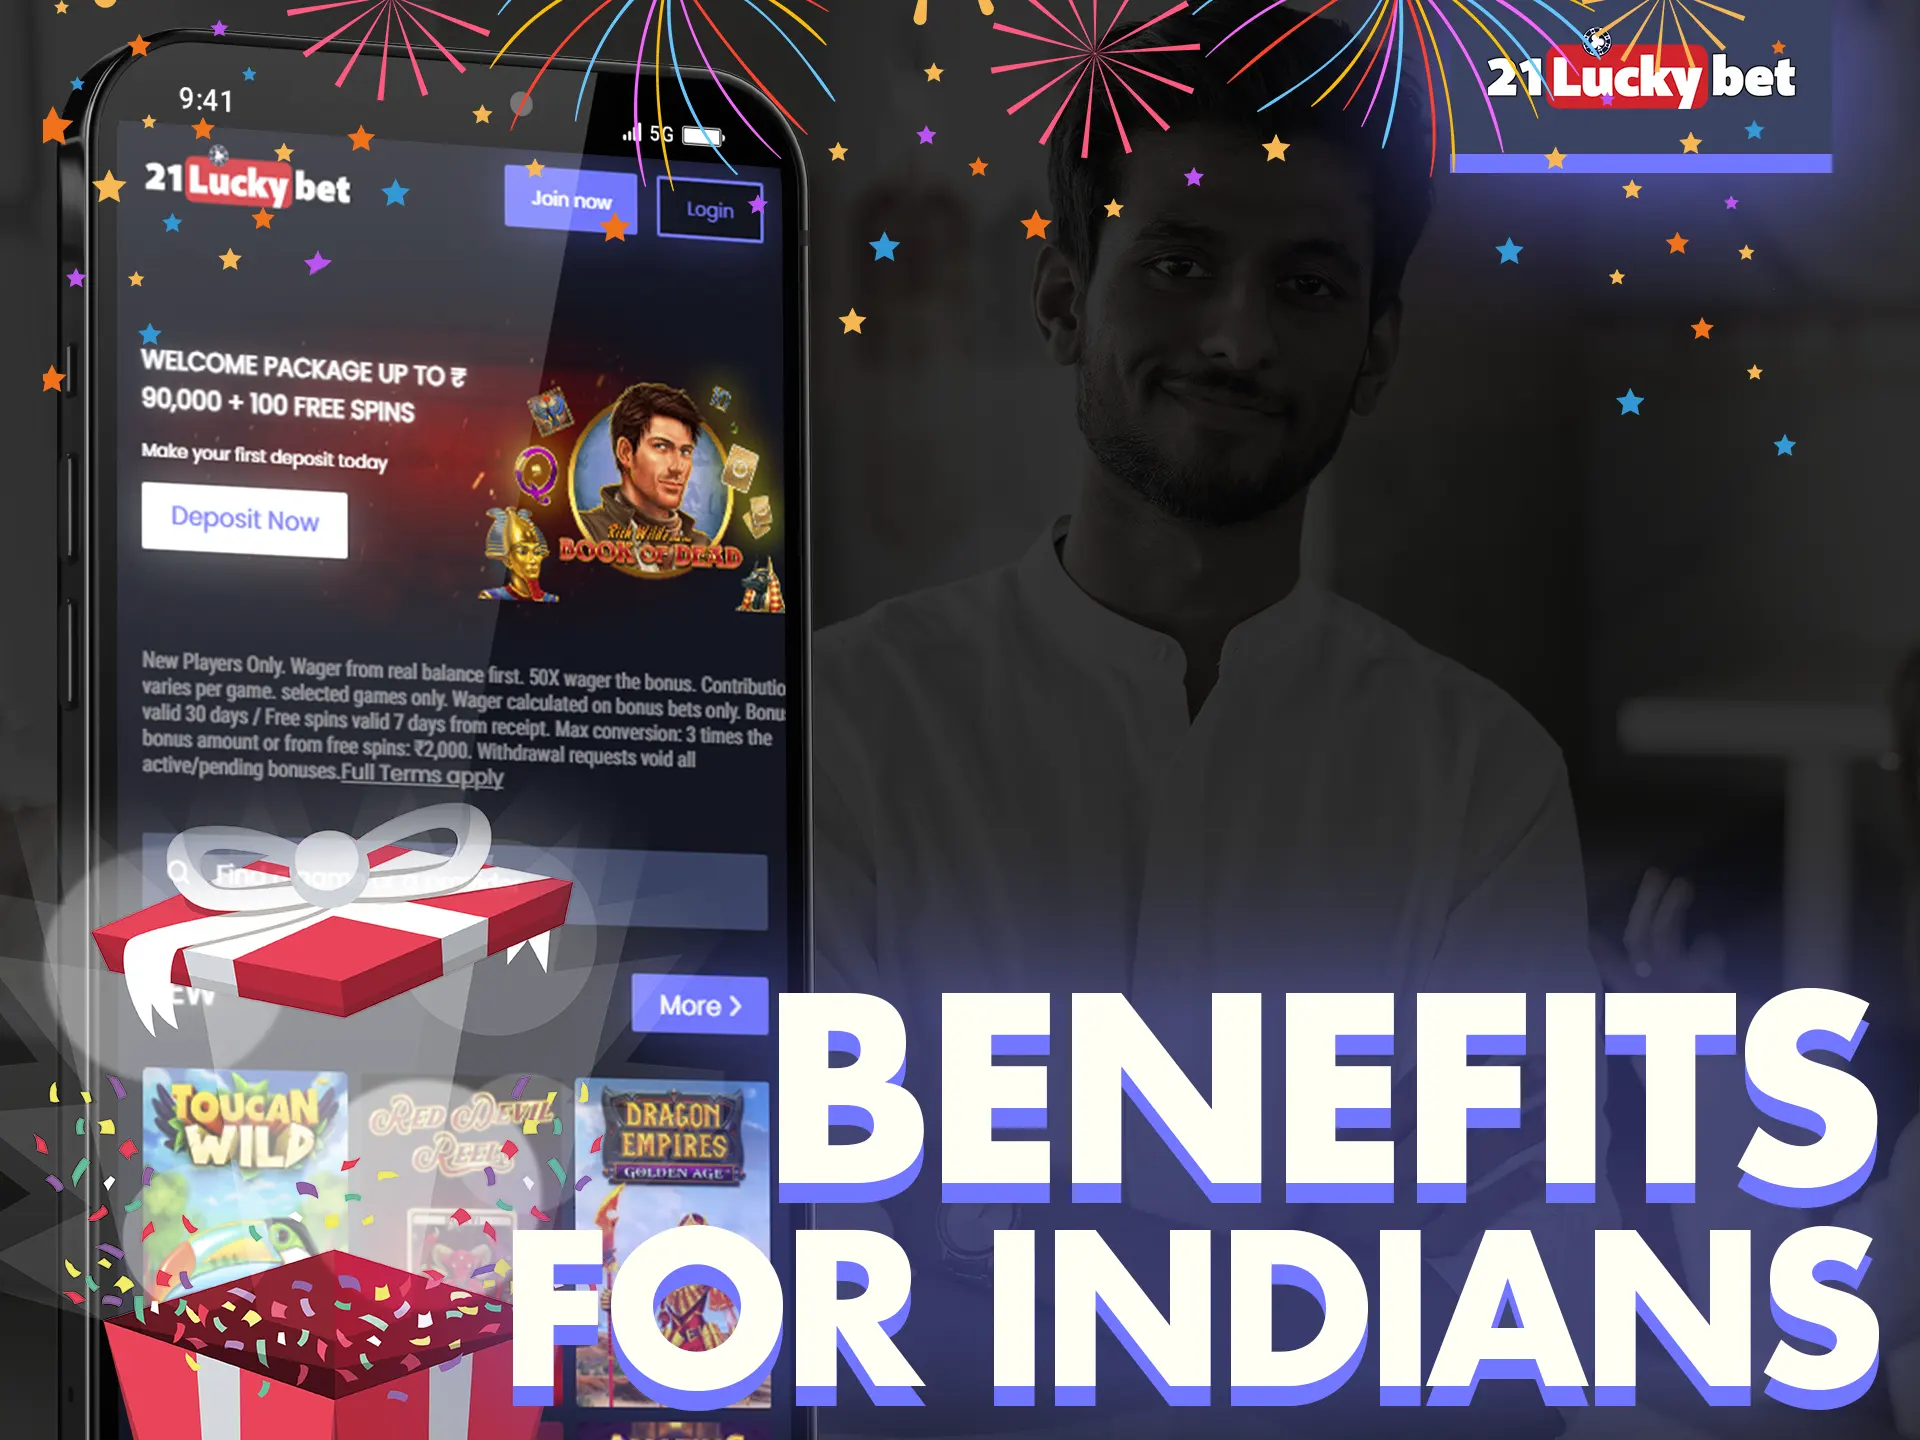 In 21luckybet app count on the best benefits and bonuses.